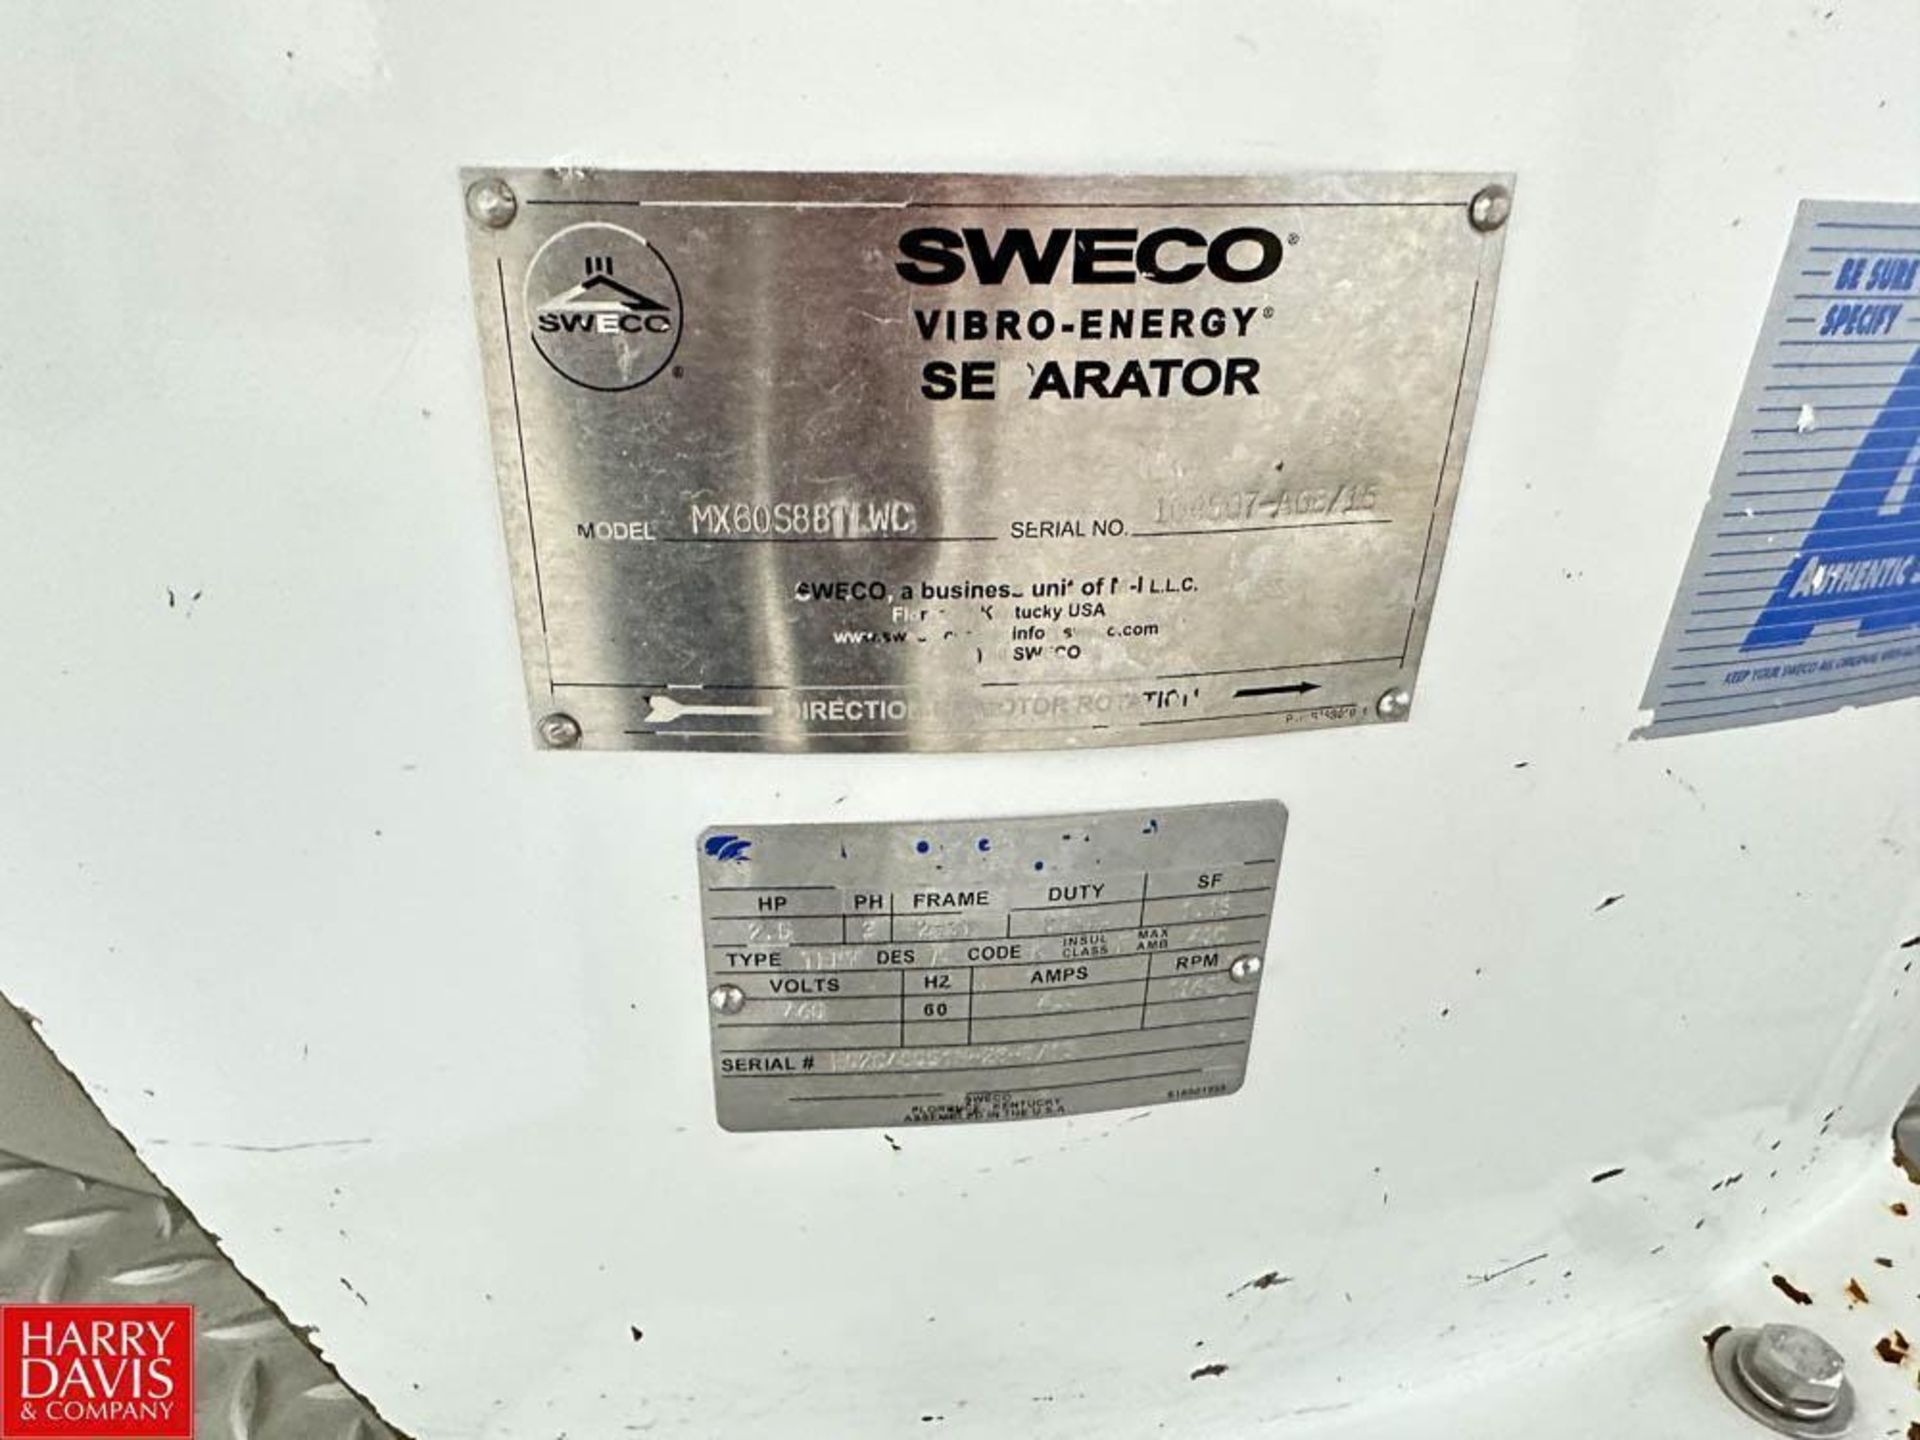 Sweco 60" Vibro-Energy Separator, Model: MX60588TLWC, S/N: 104507-A08/15 with S/S Platform - Image 3 of 8